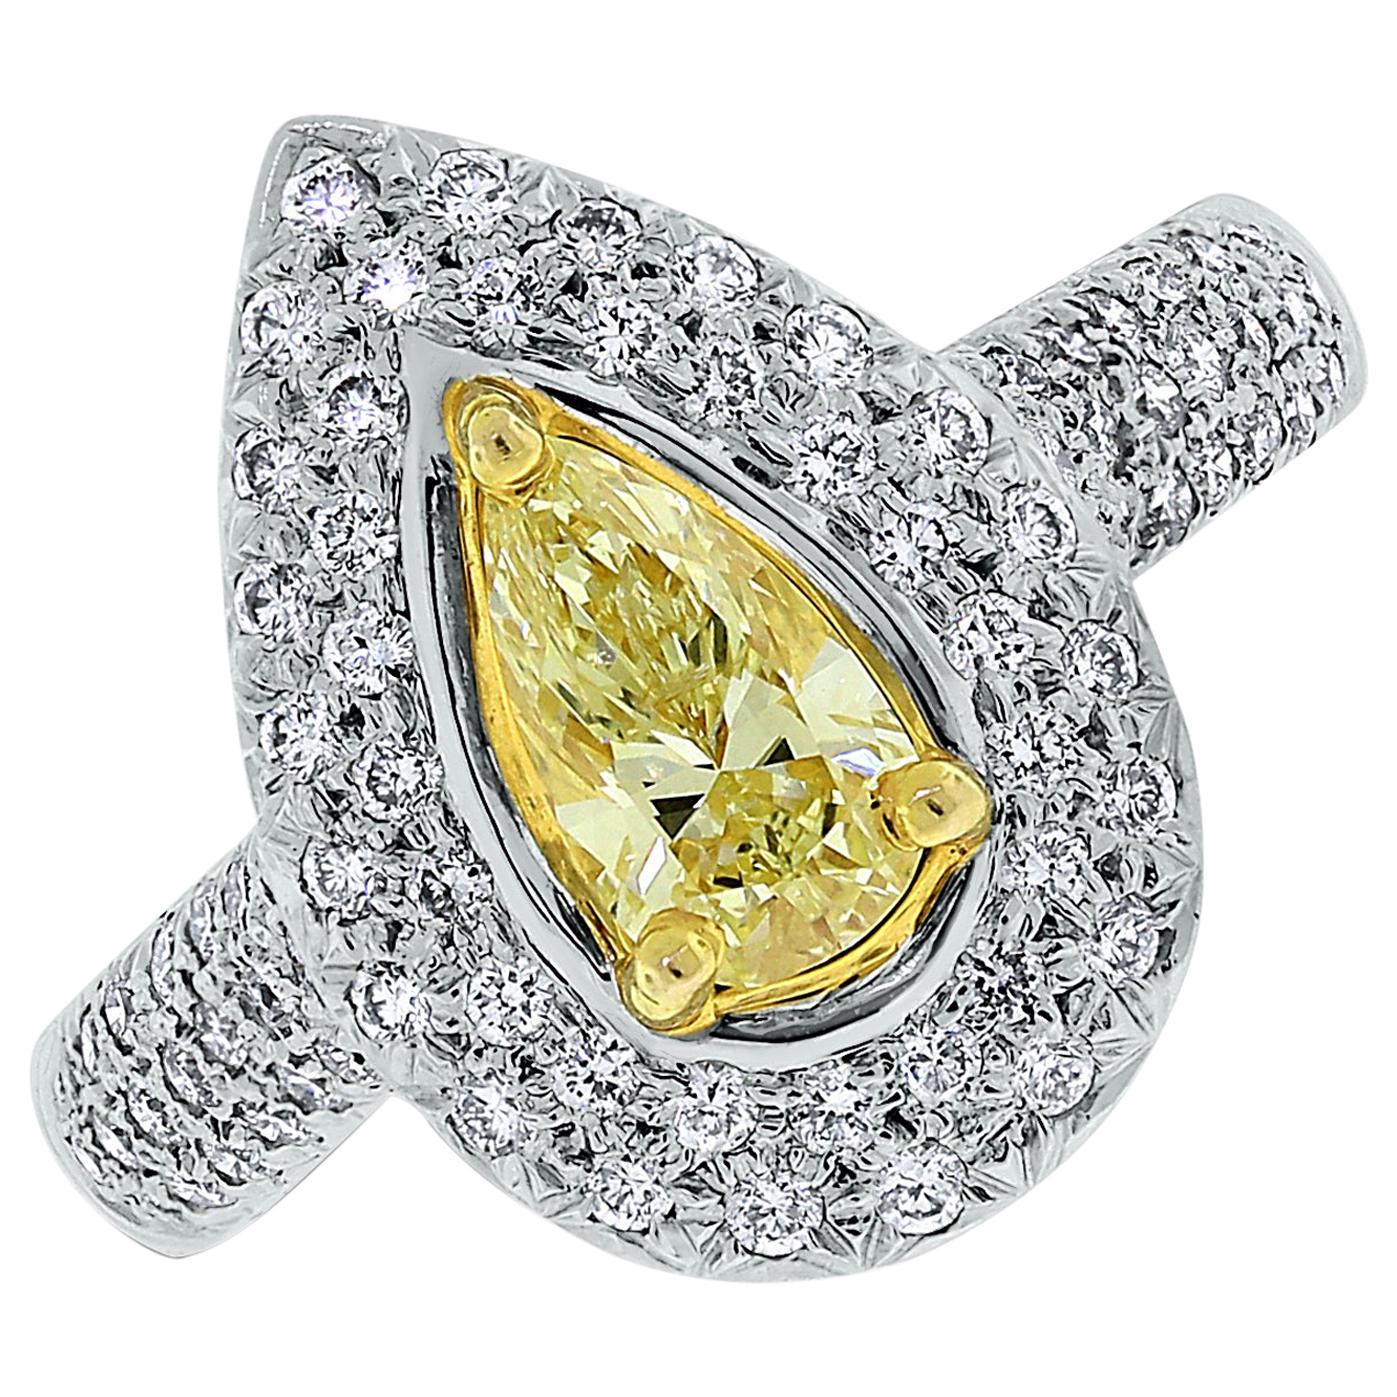 Beauvince Luz Ring 0.56 Carat Pear Shape Fancy Yellow SI2 Diamond in White Gold For Sale